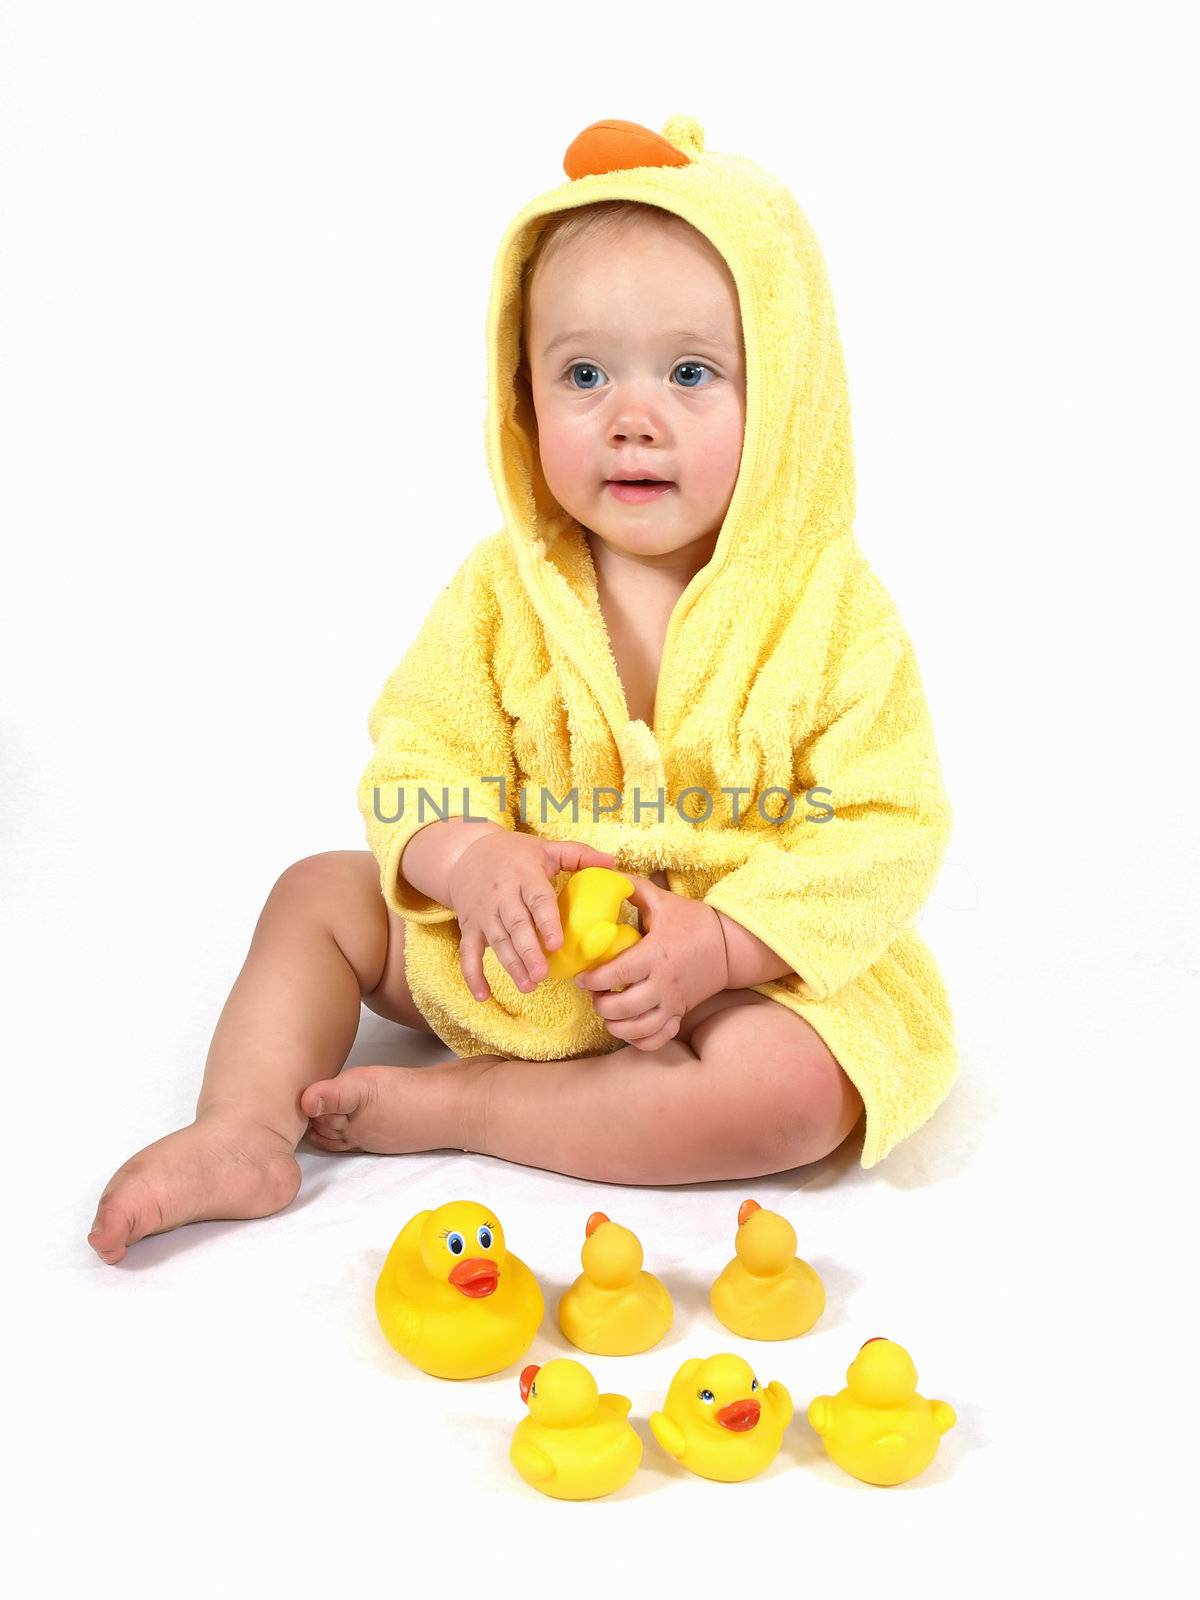 A female child wearing a yellow bathrobe plays with her rubber ducks.